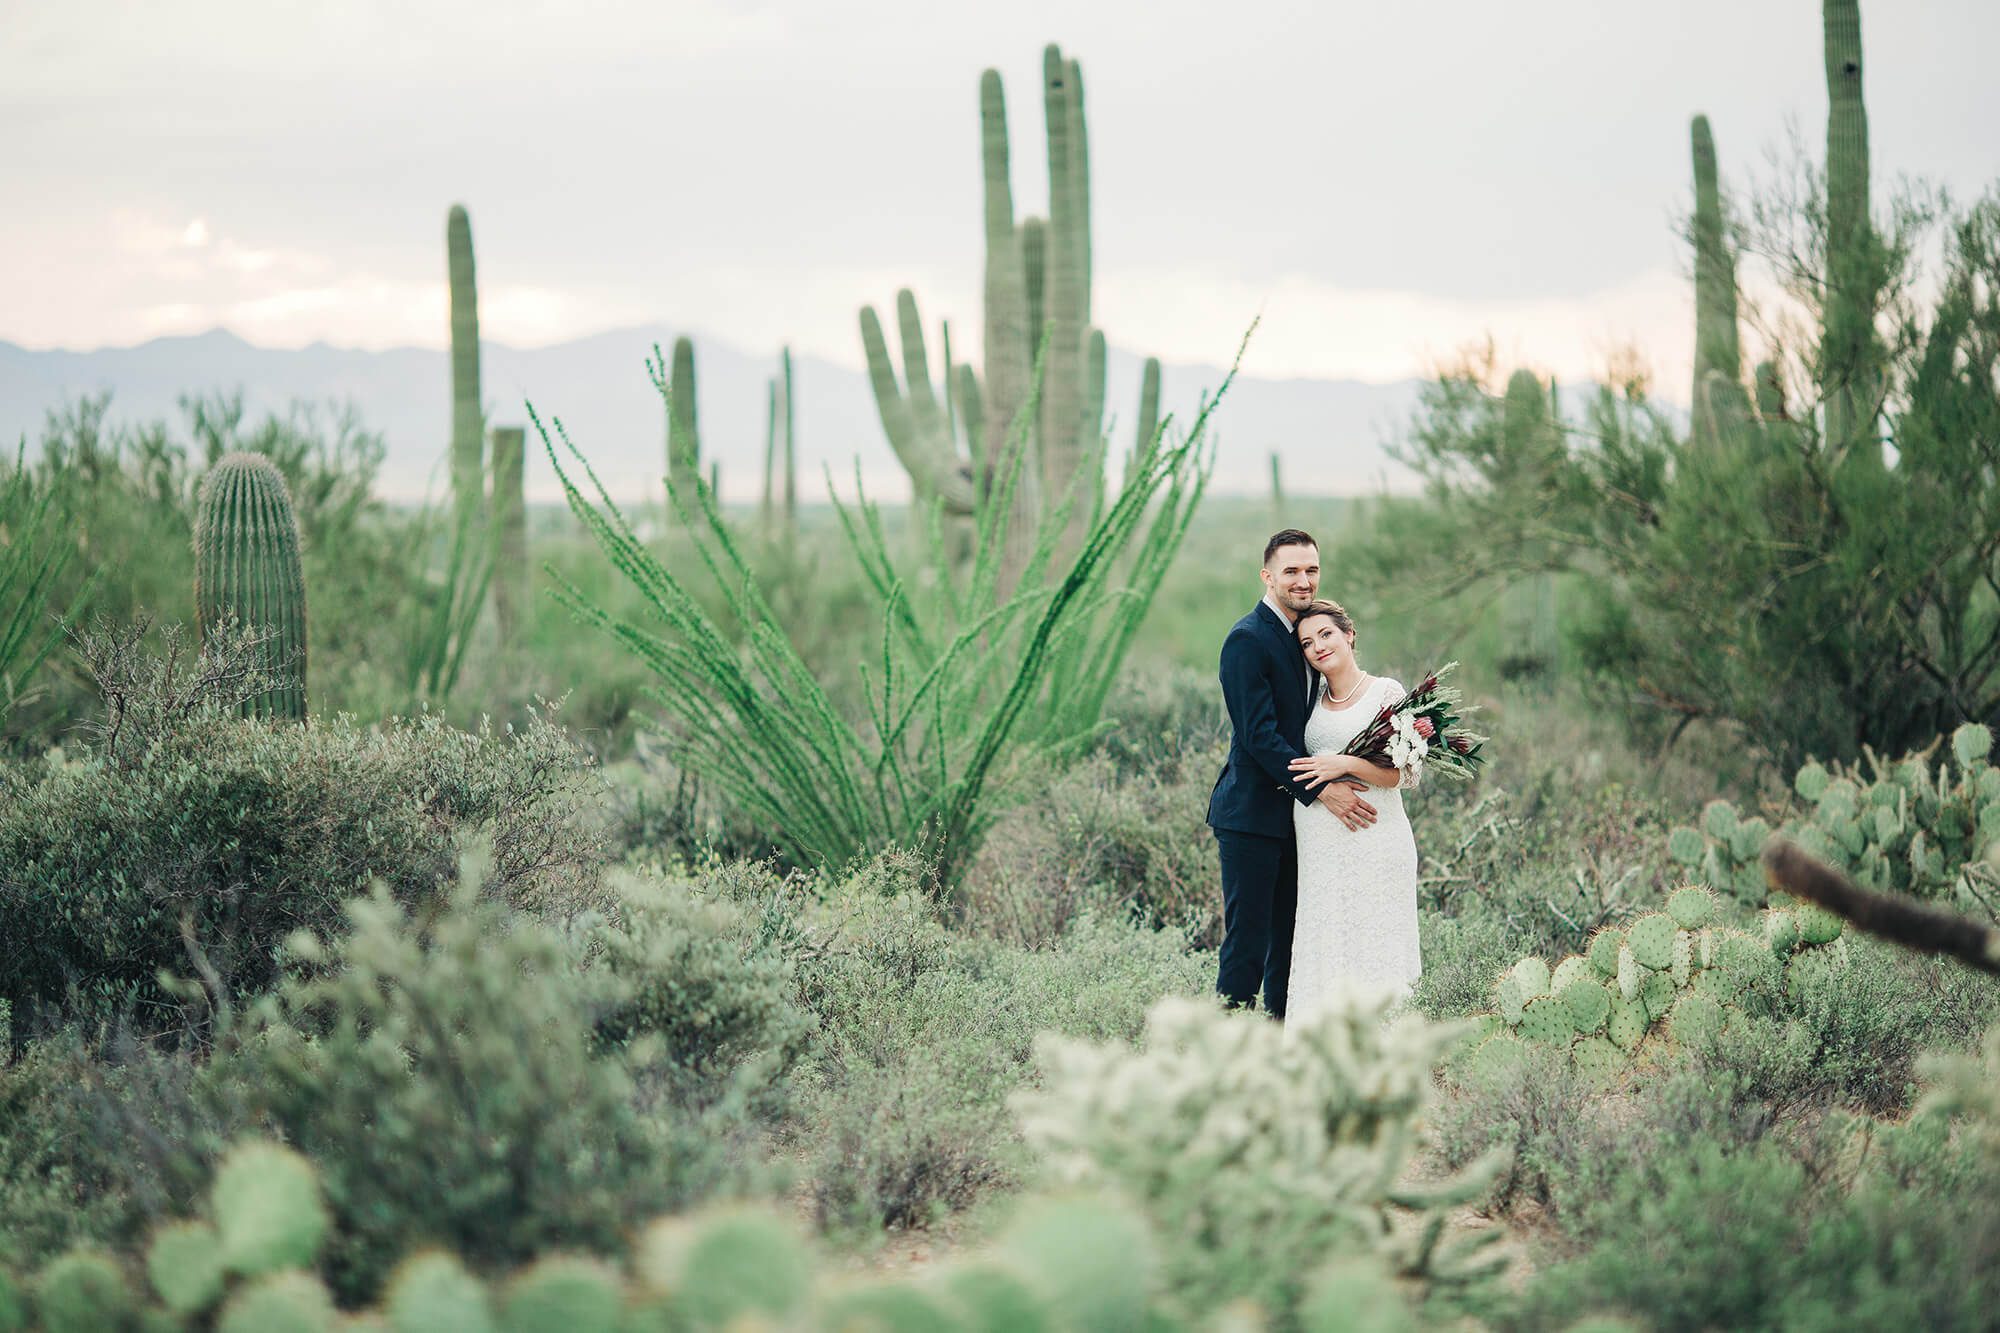 A beautiful location for this gorgeous couple's elopement, the Sonoran desert just outside of Tucson.